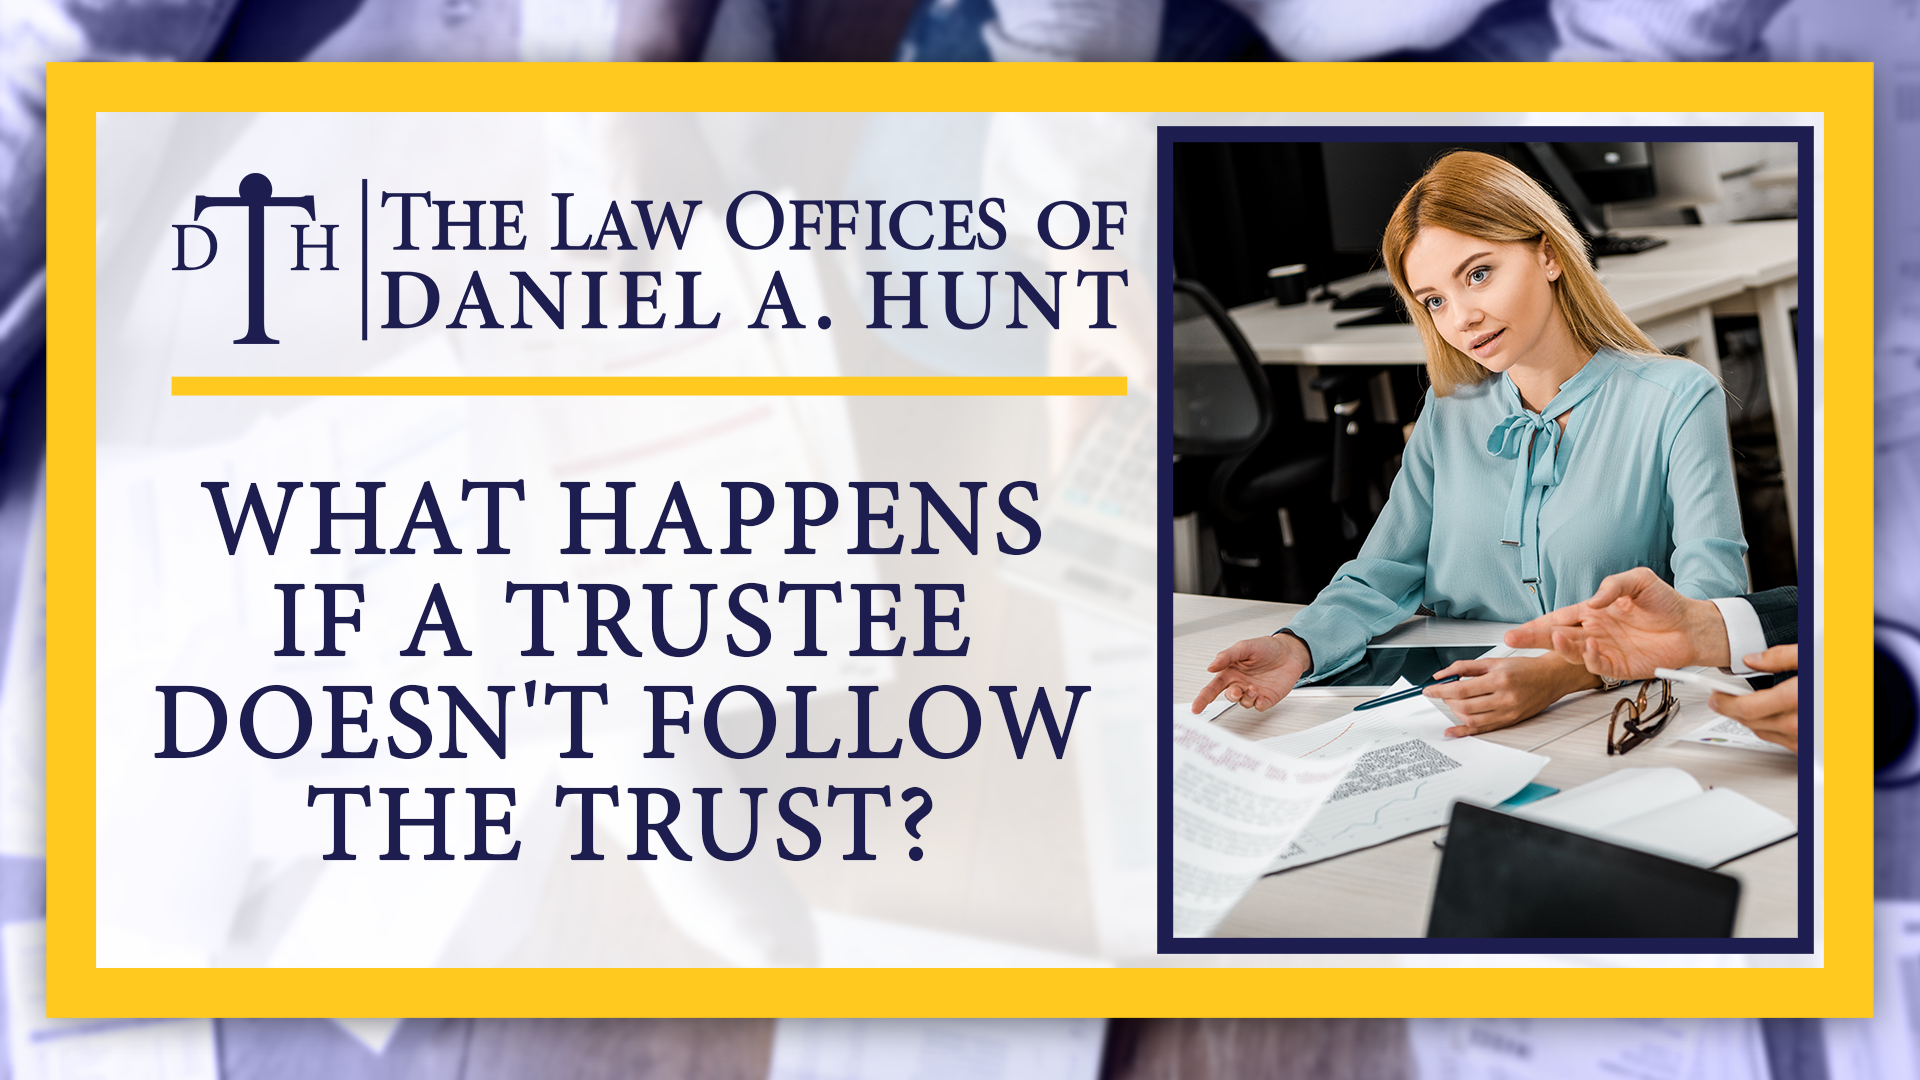 What Happens If a Trustee Doesn't Follow the Trust?